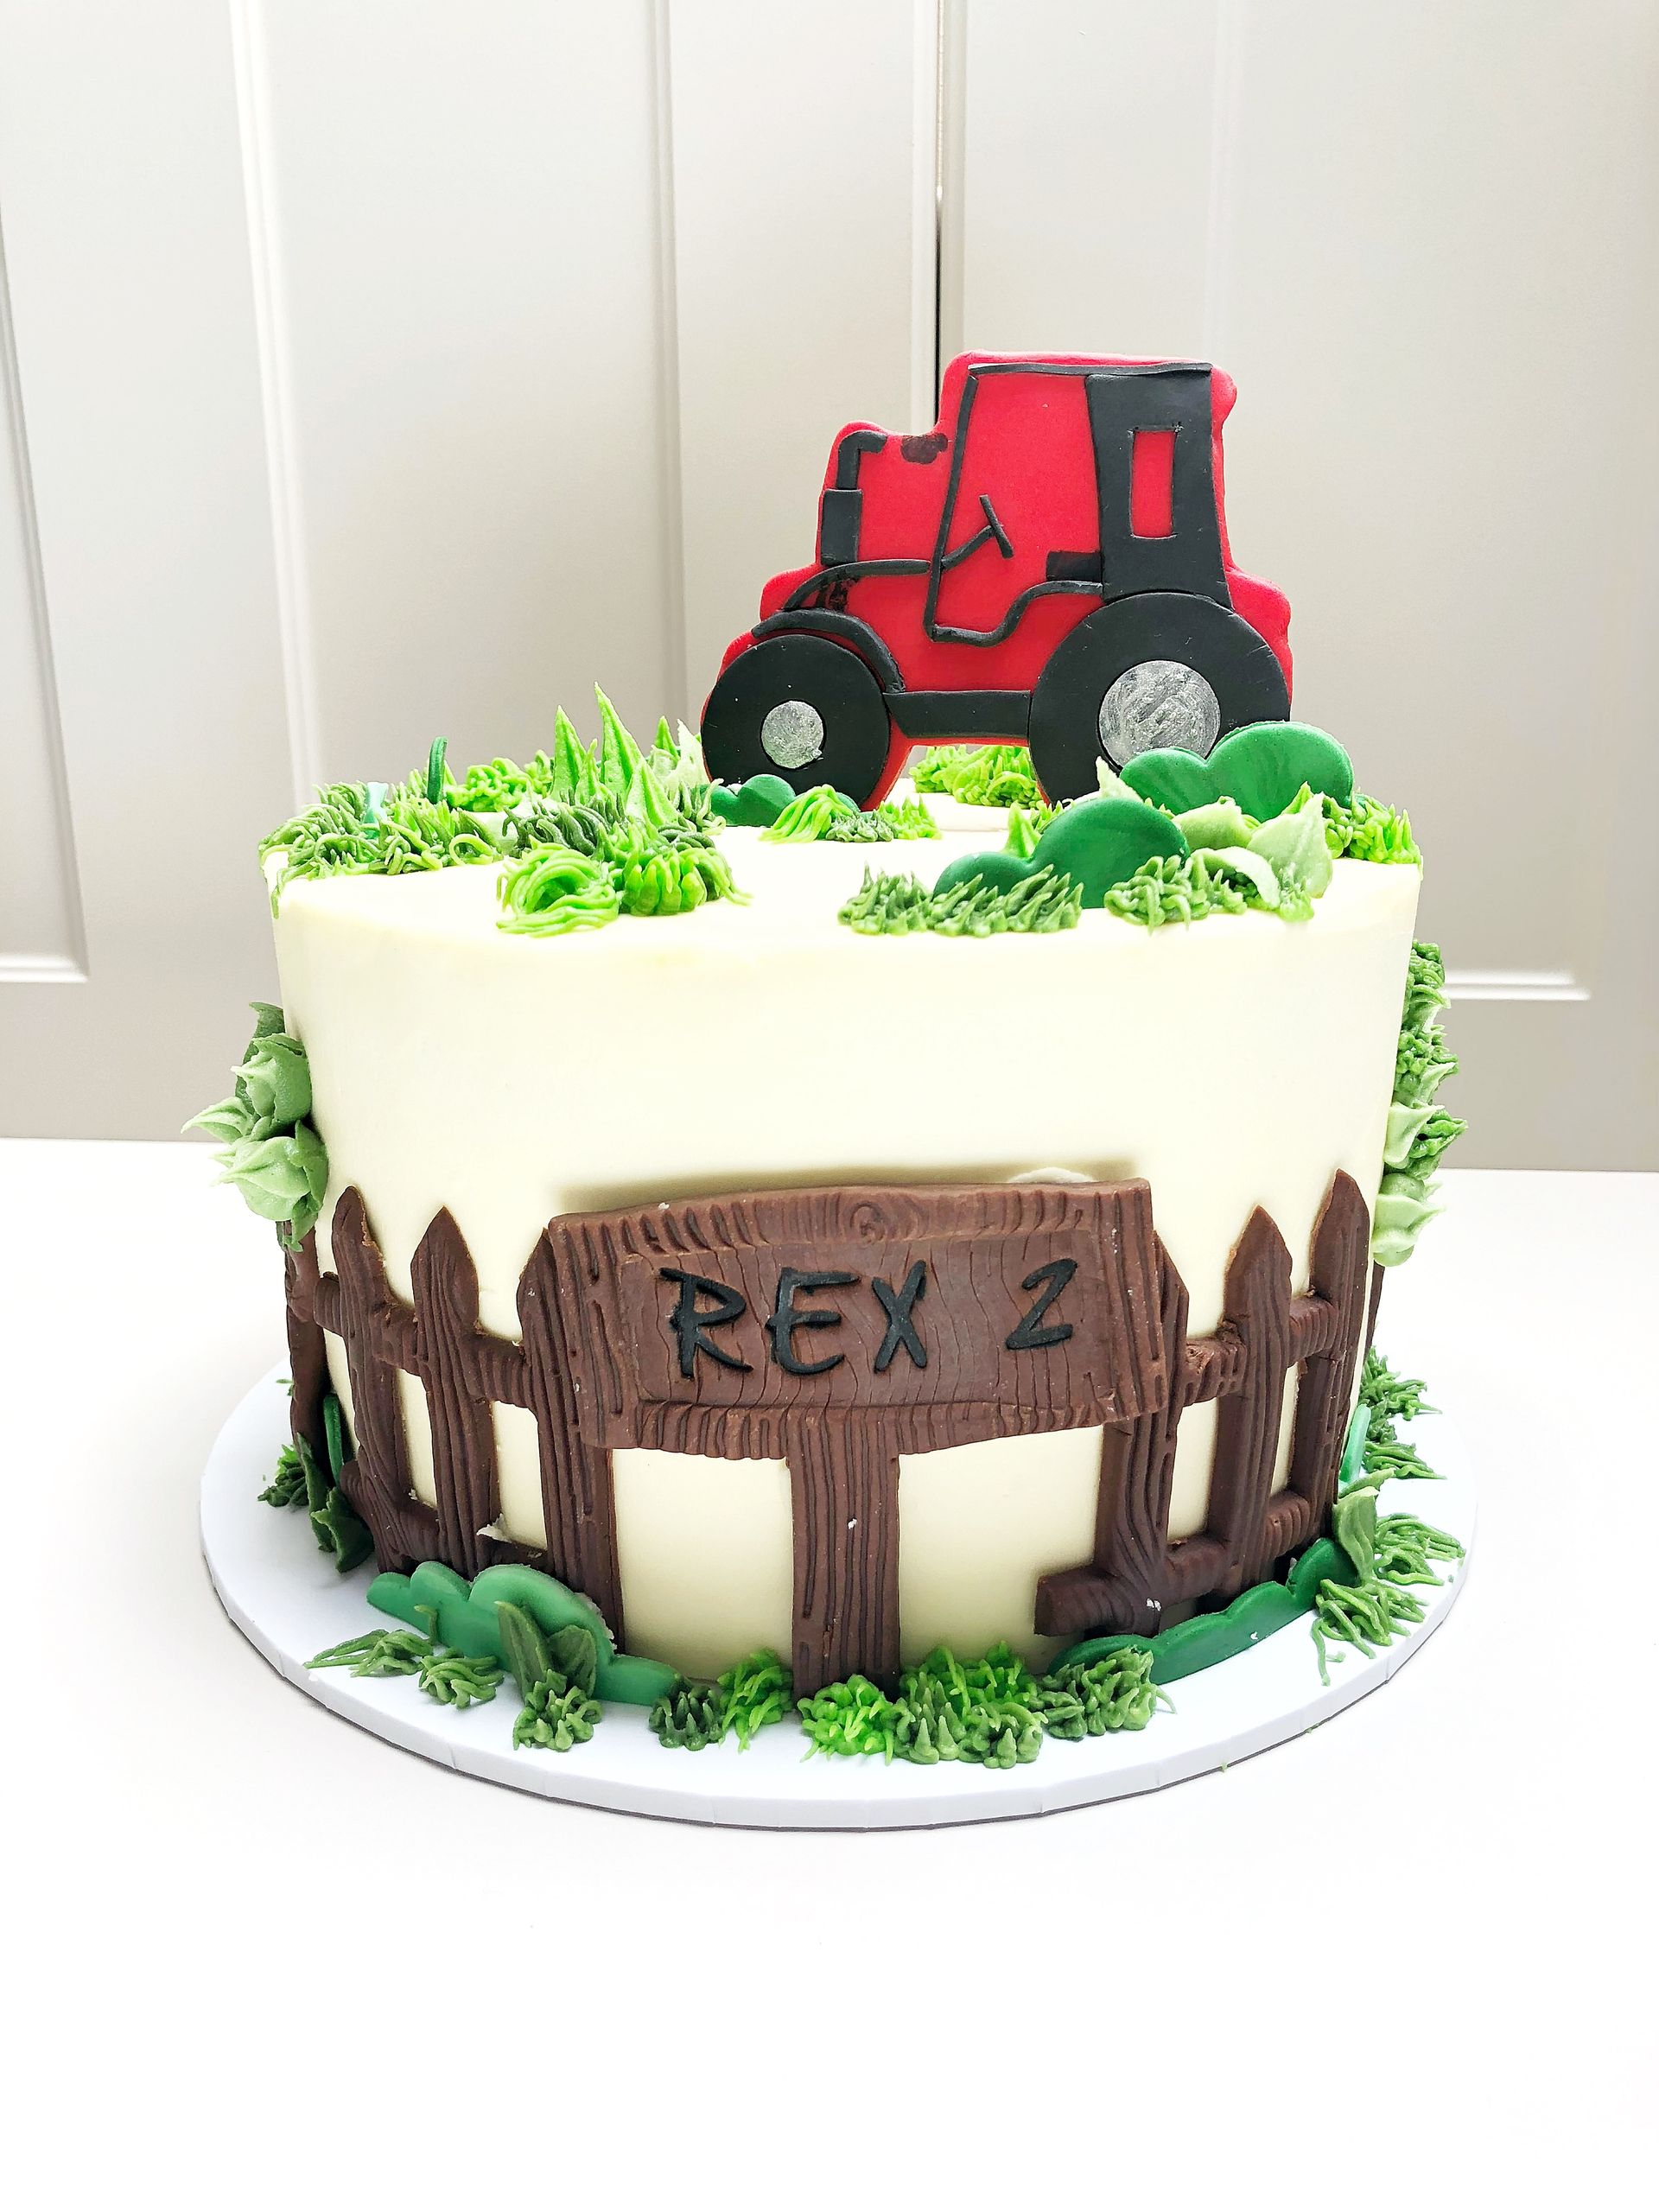 Tractor themed cake with fondant tractor, shrubs, grass and fencing details.